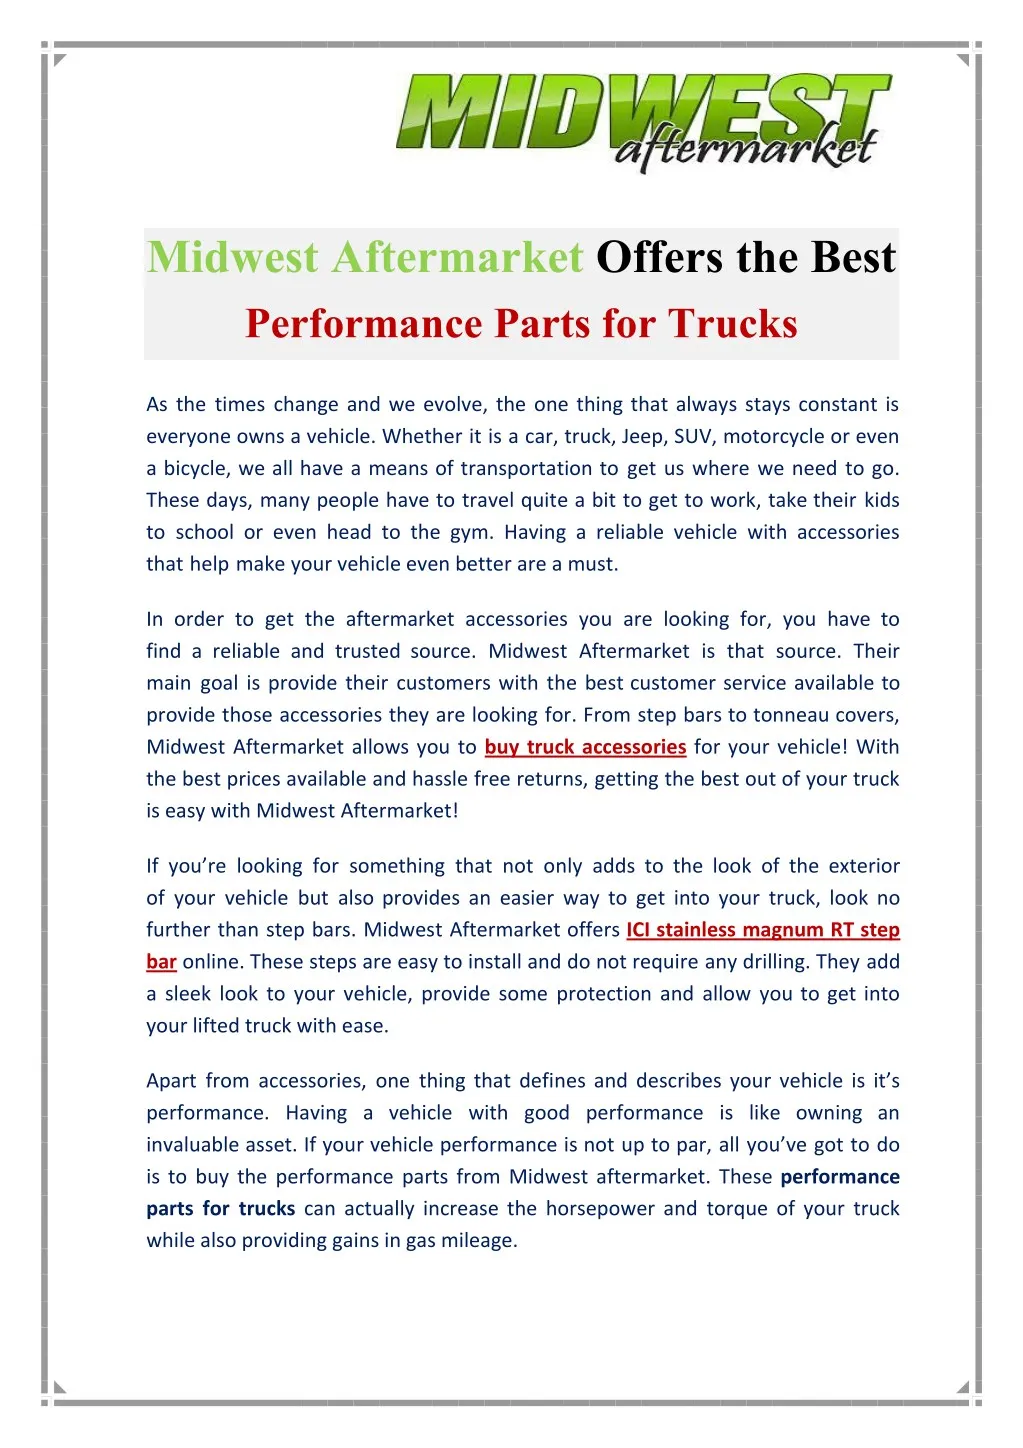 midwest aftermarket offers the best performance